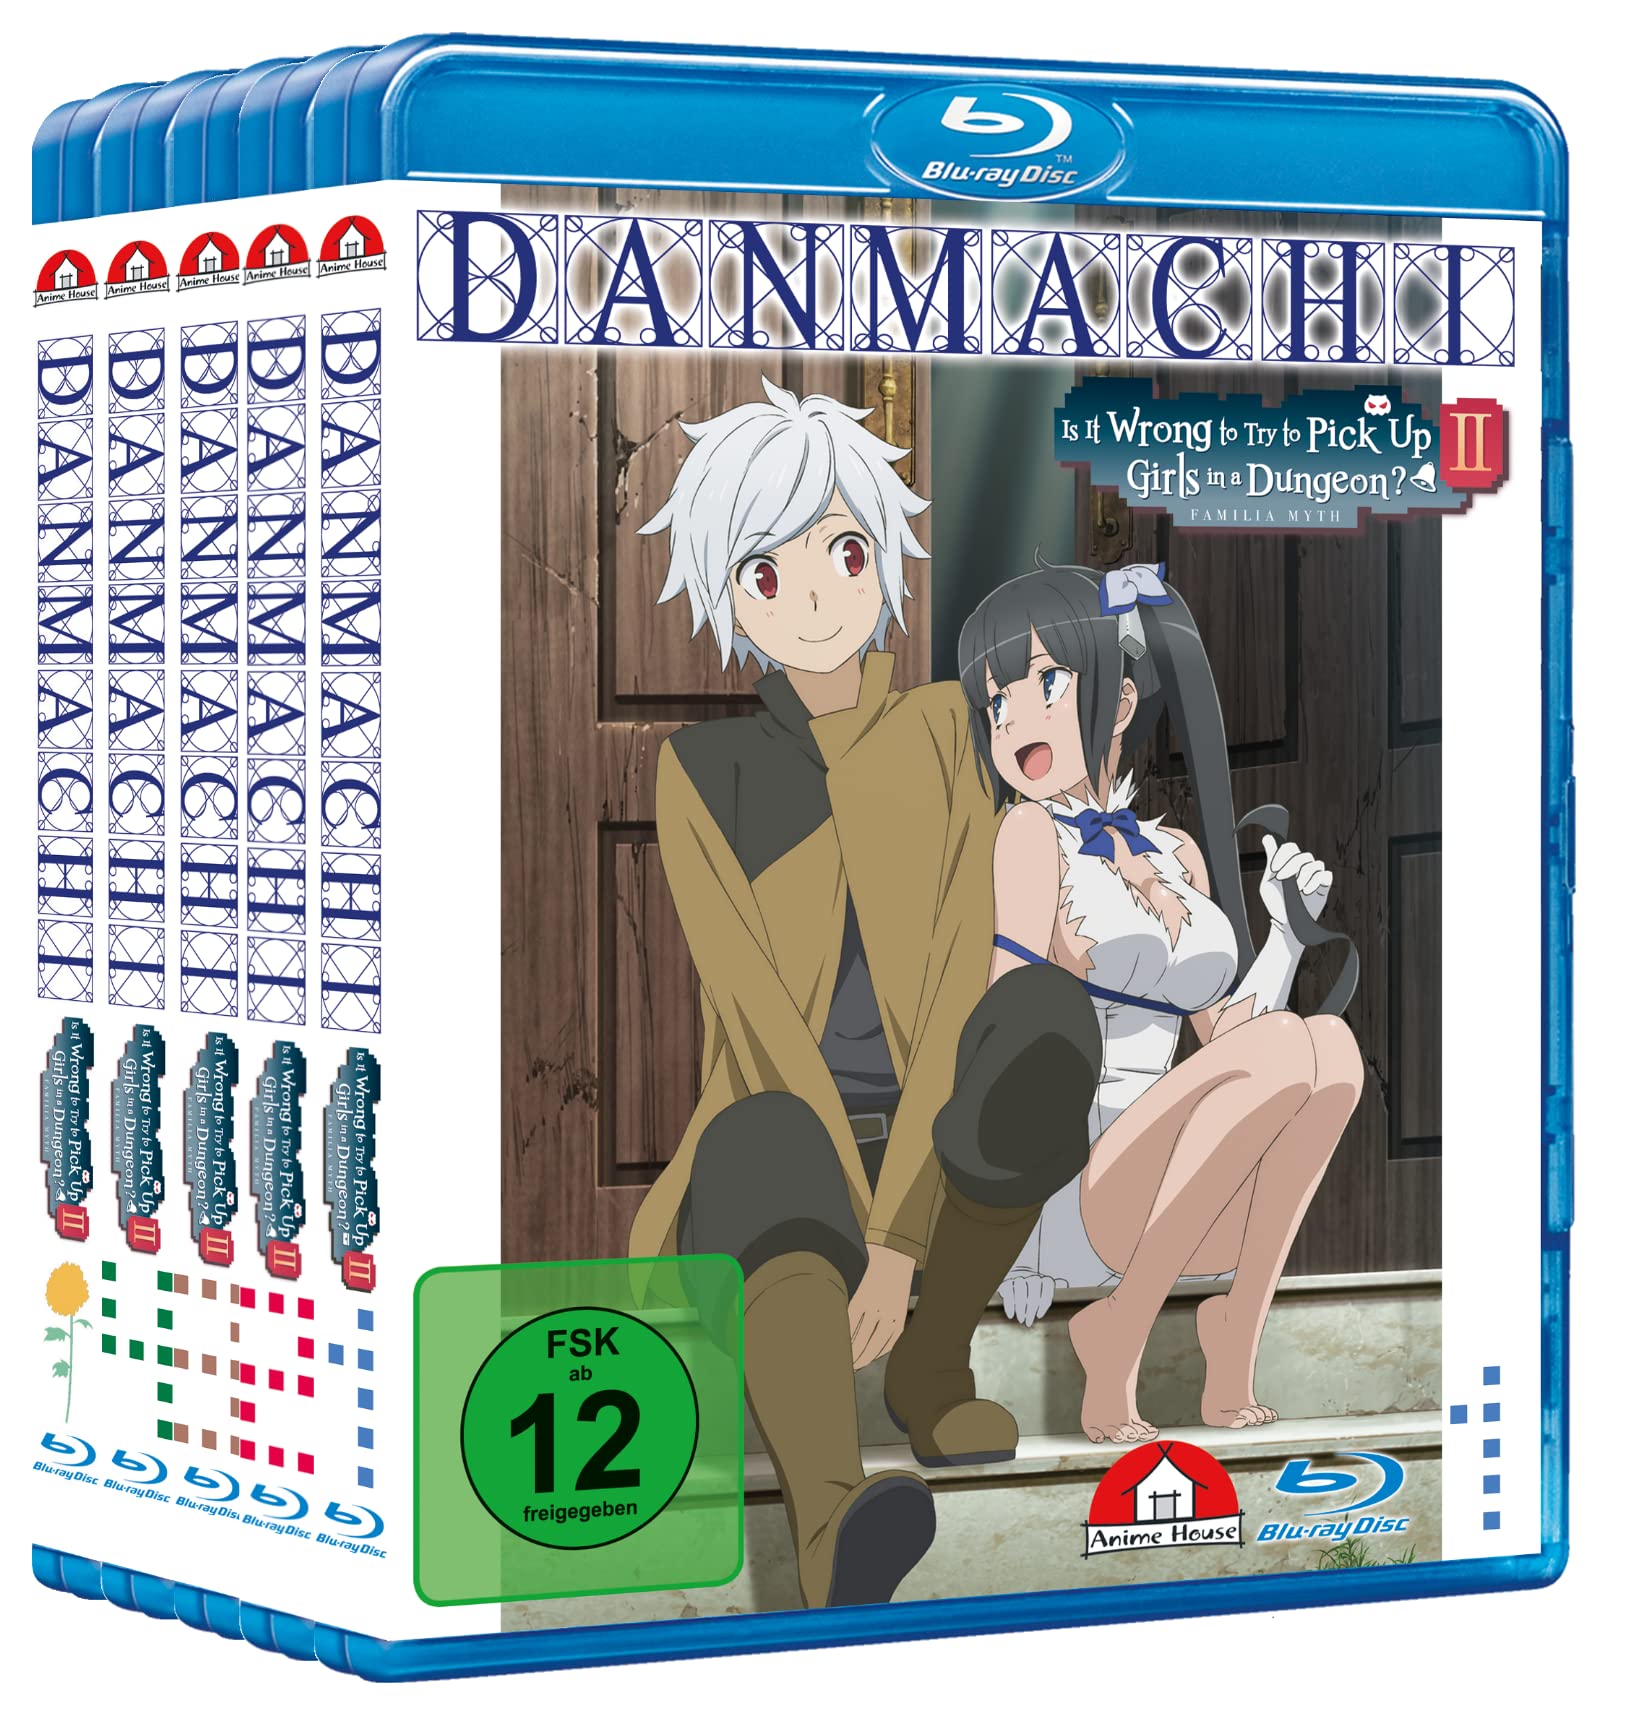 DanMachi - Is It Wrong to Try to Pick Up Girls in a Dungeon? - Staffel 2 - Gesamtausgabe - Bundle - Vol.1-4 inkl. OVA - [Blu-ray]